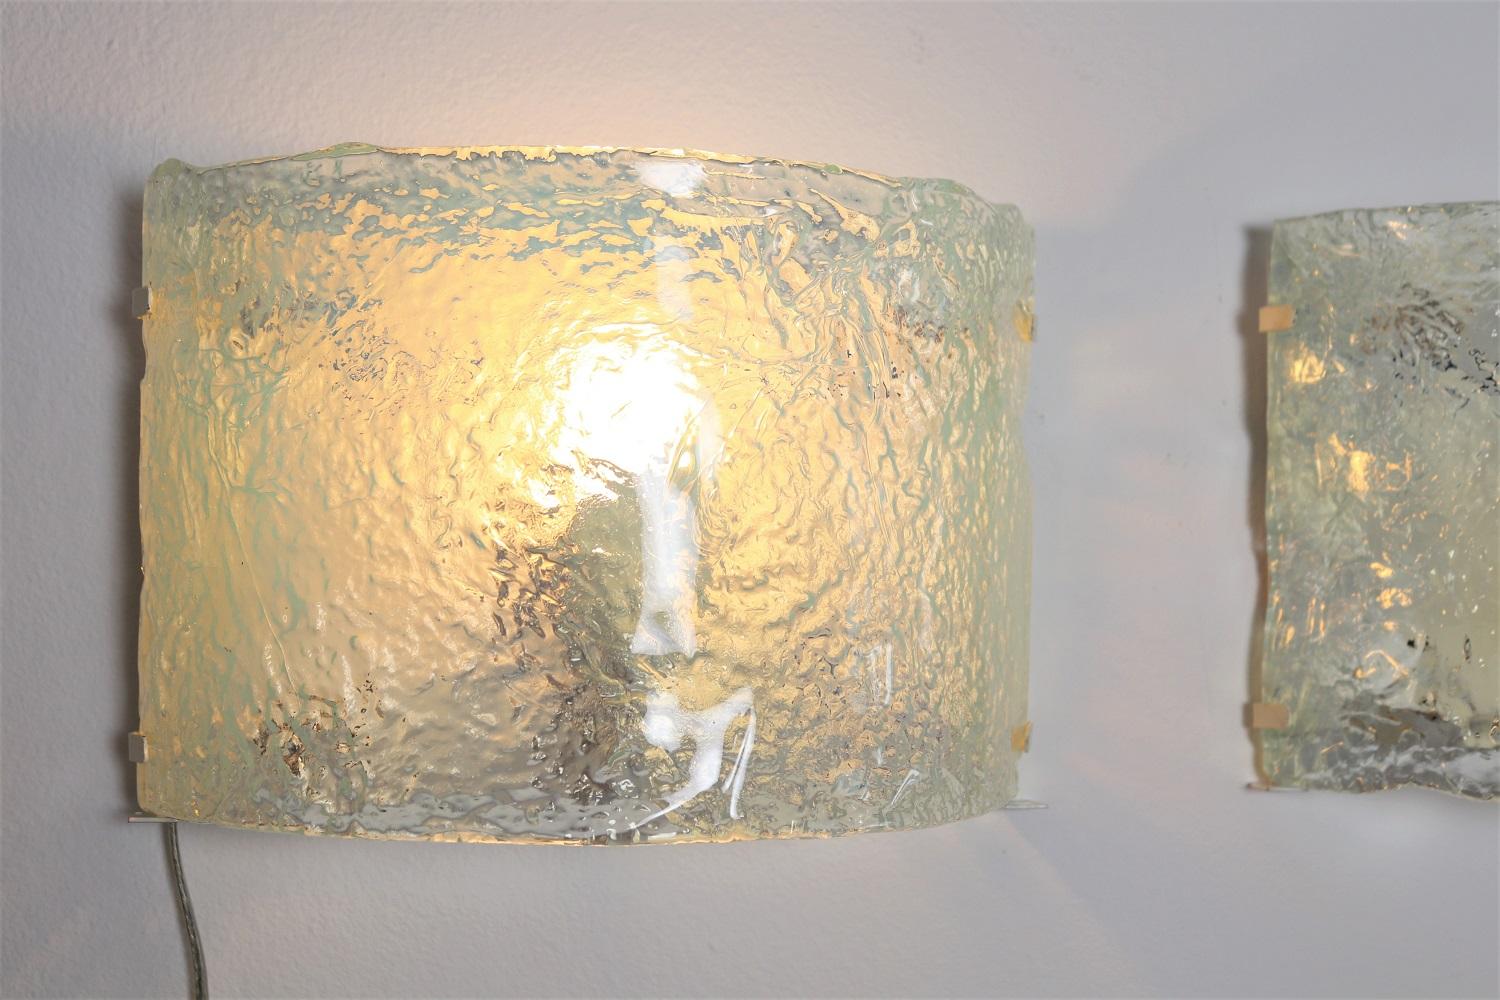 Italian Midcentury Wall Sconces in Opaline Murano Glass by Carlo Nason, 1970s For Sale 1